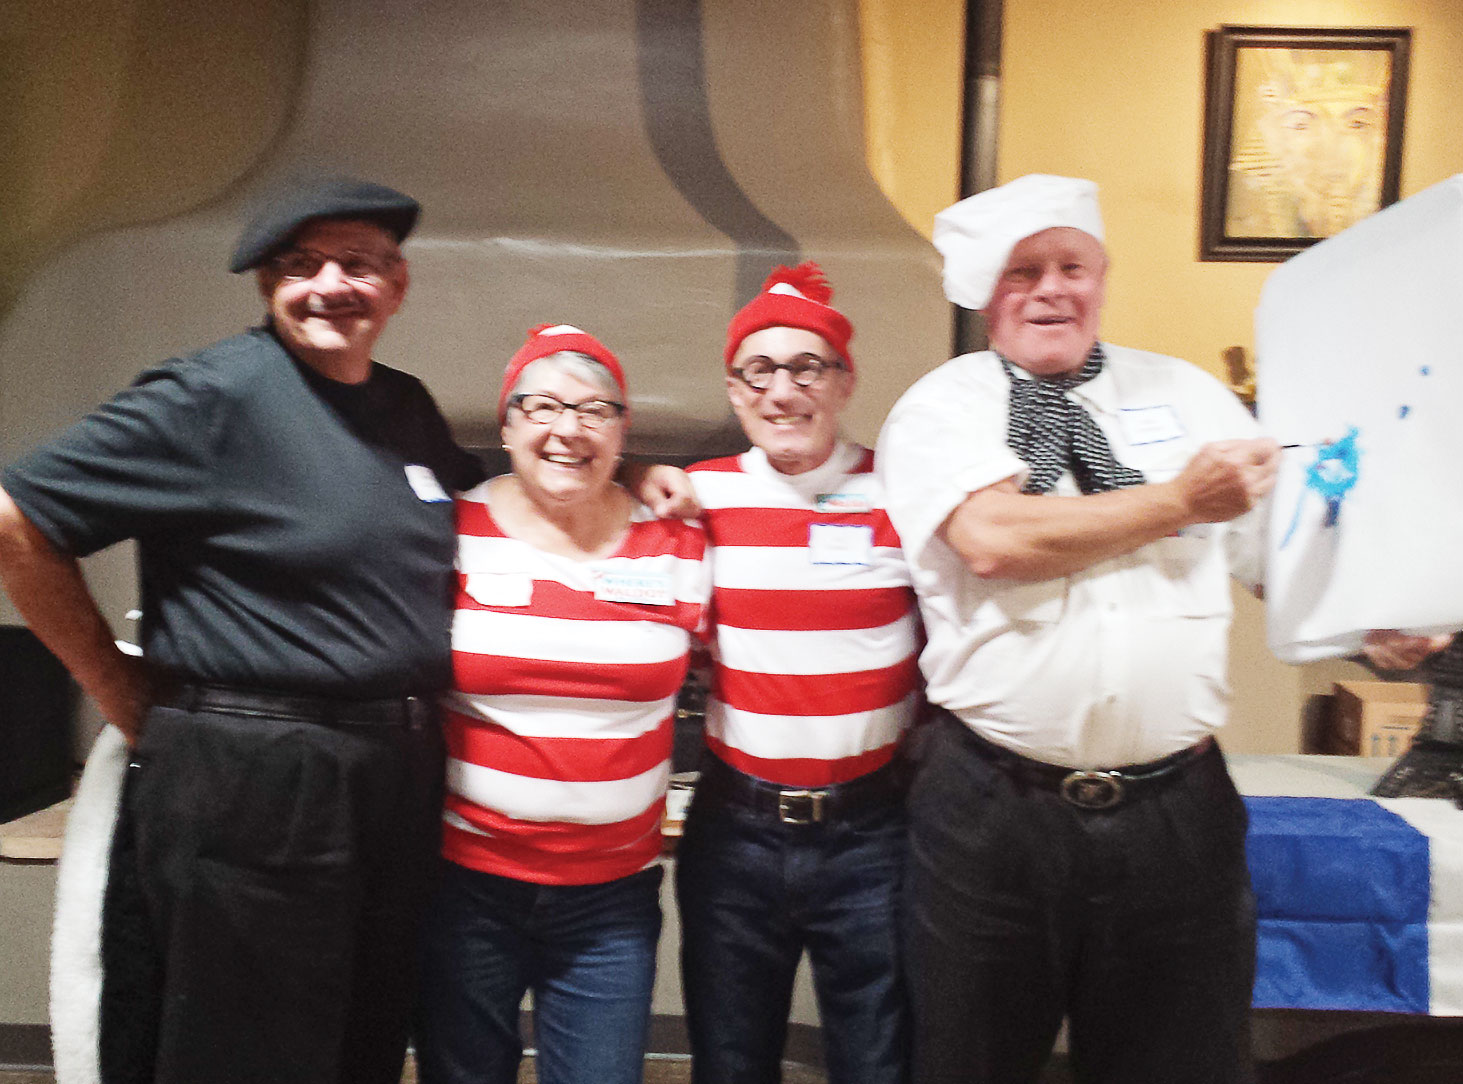 Creative Costume winners: Frank Hartley (Pepe’ Le Pew), The DiEnnos (Where’s Waldo?) and Lynn Clemens (Monet)